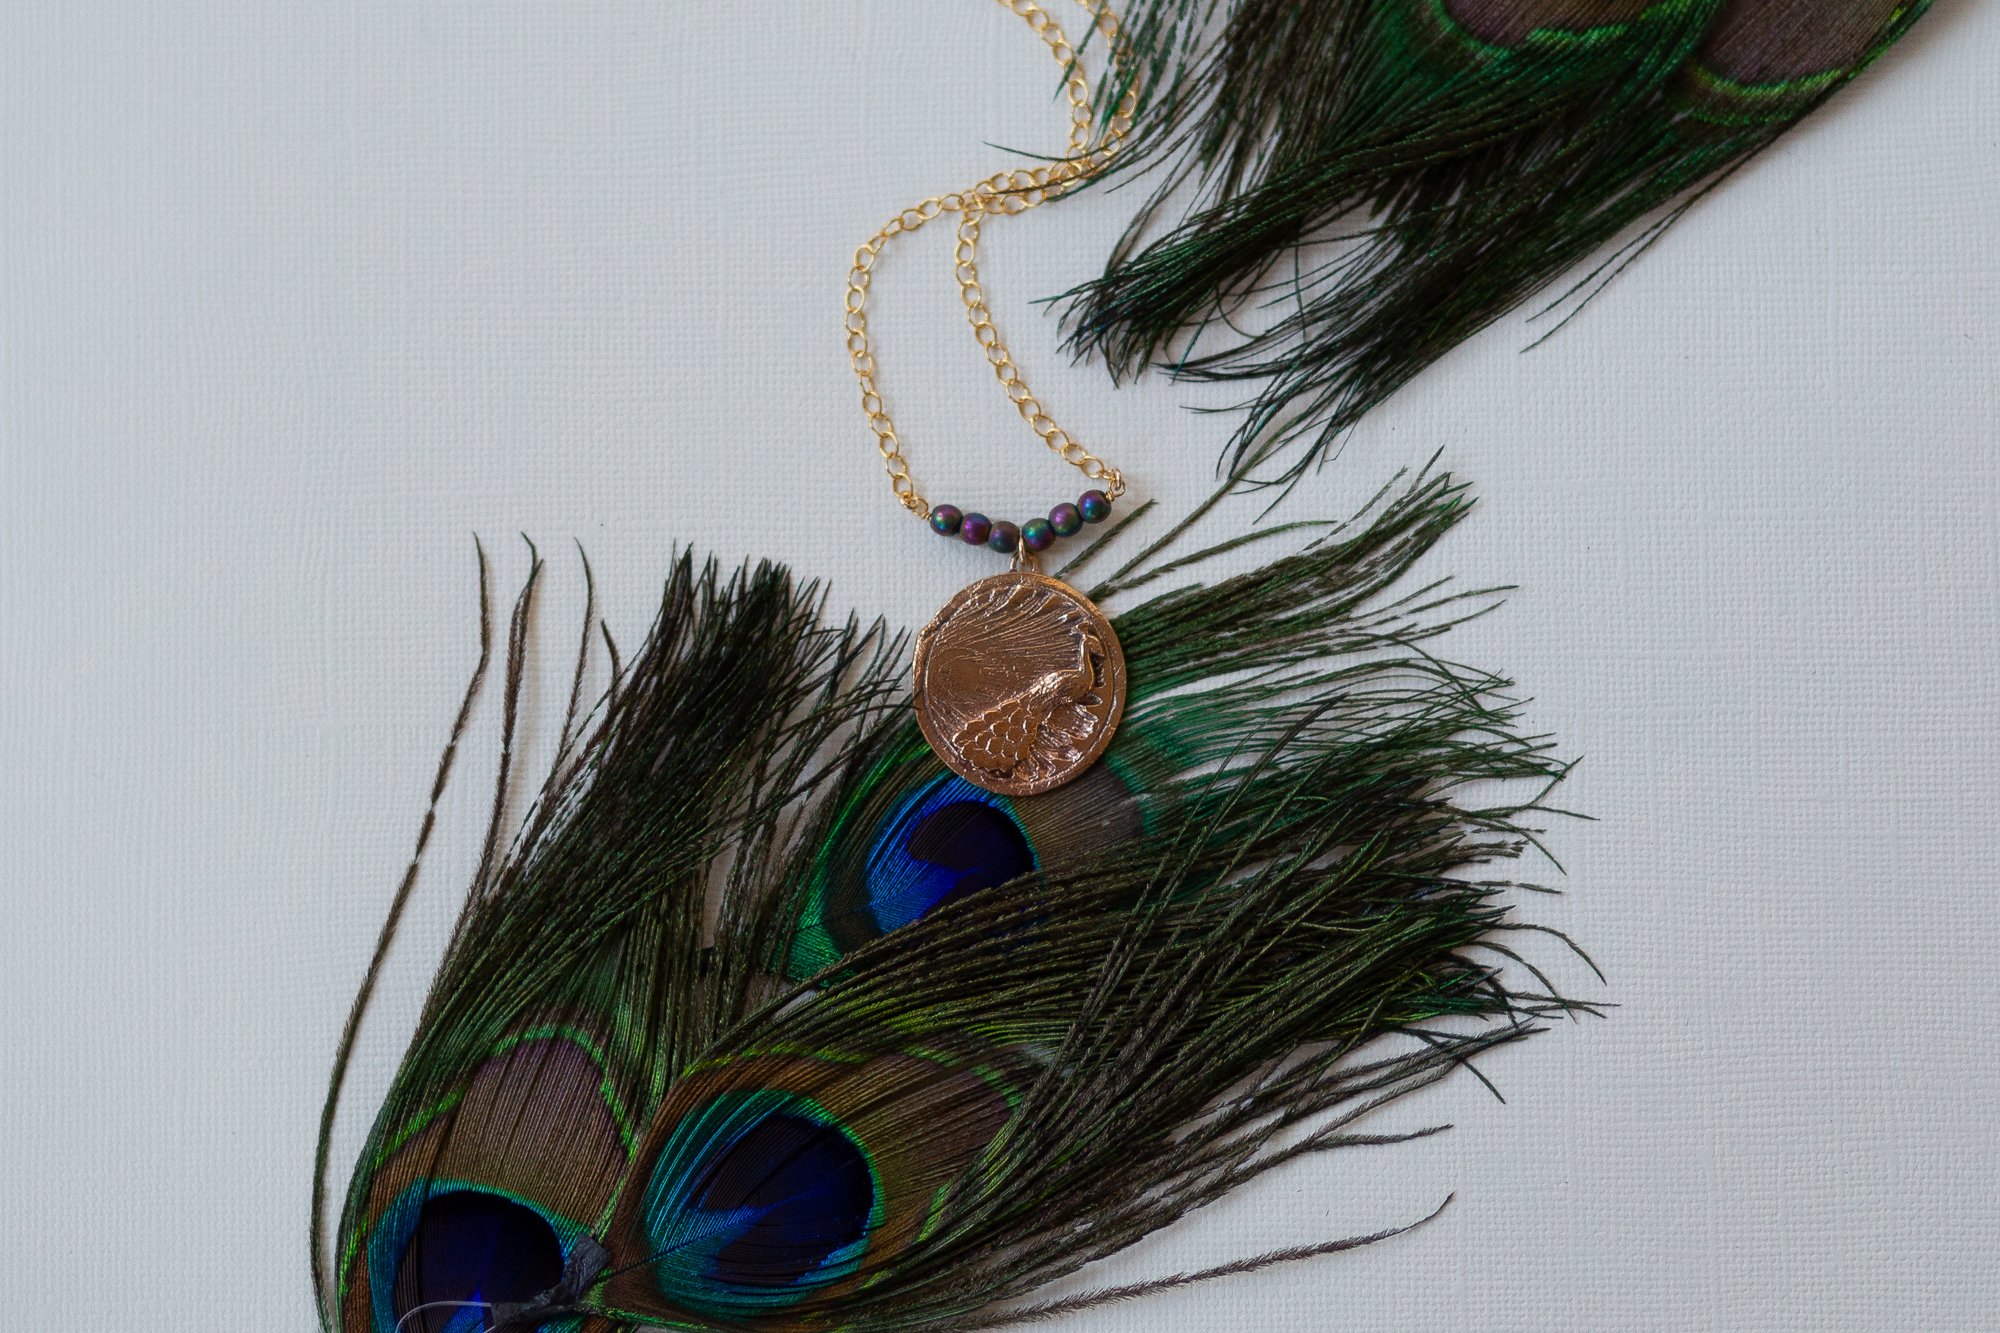 Peacock Feather necklace with blue sapphires